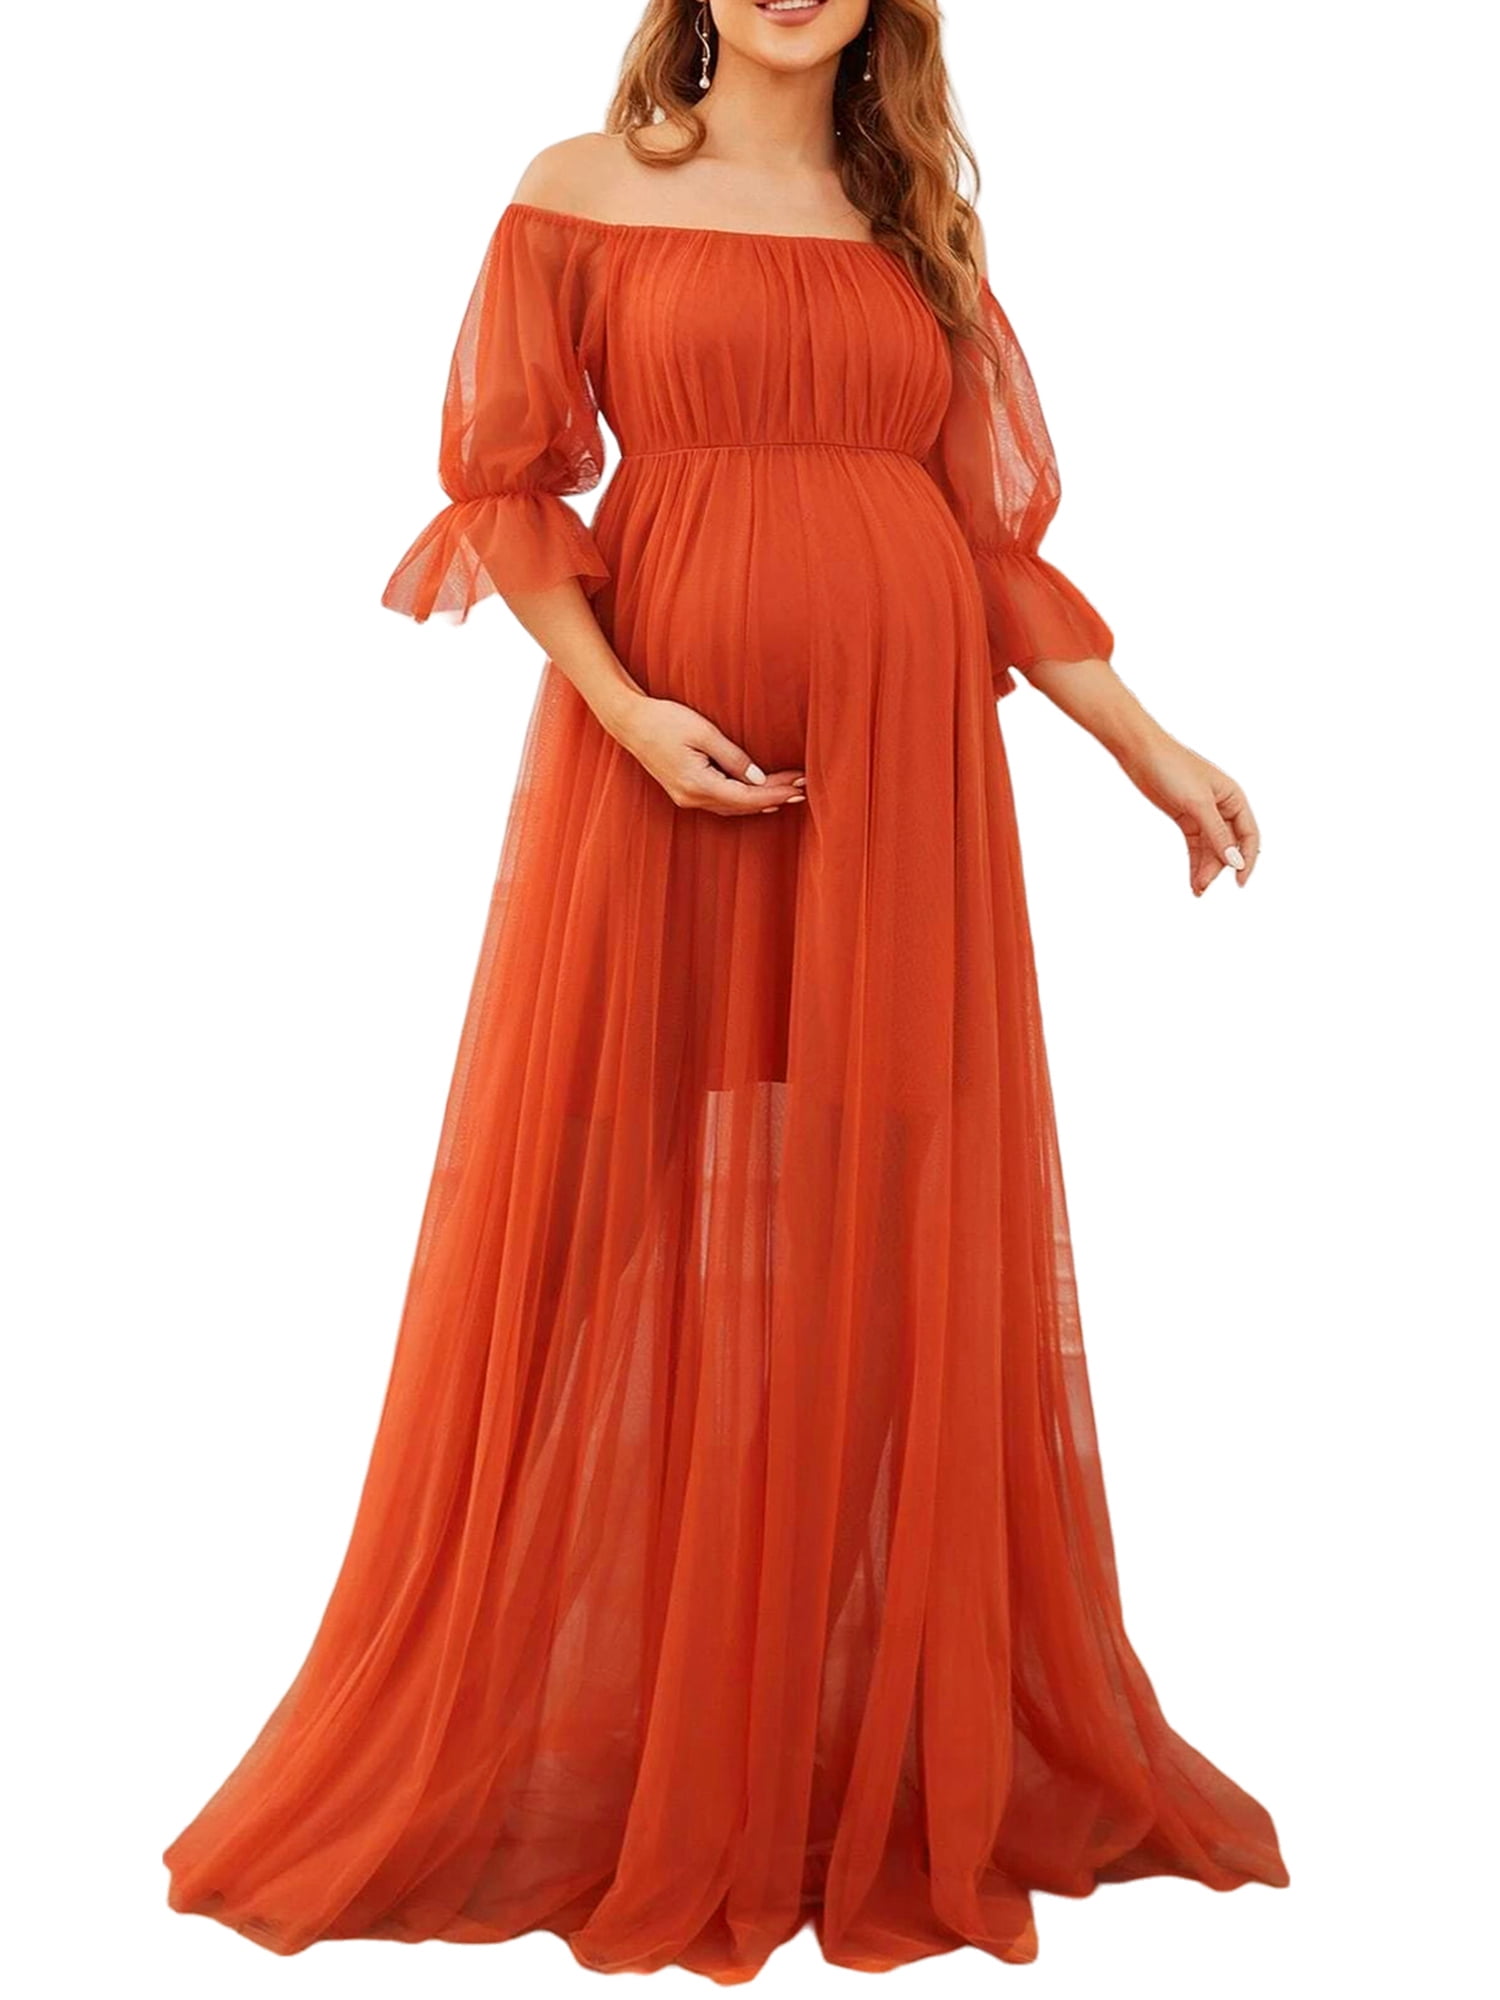 New Maternity Dresses Photoshoot Clothes Linen Cotton Dress For Pregnant  Women Photo Shooting Pregnancy Retro Loose Fitting Gown - Maternity Formal  Dresses - AliExpress